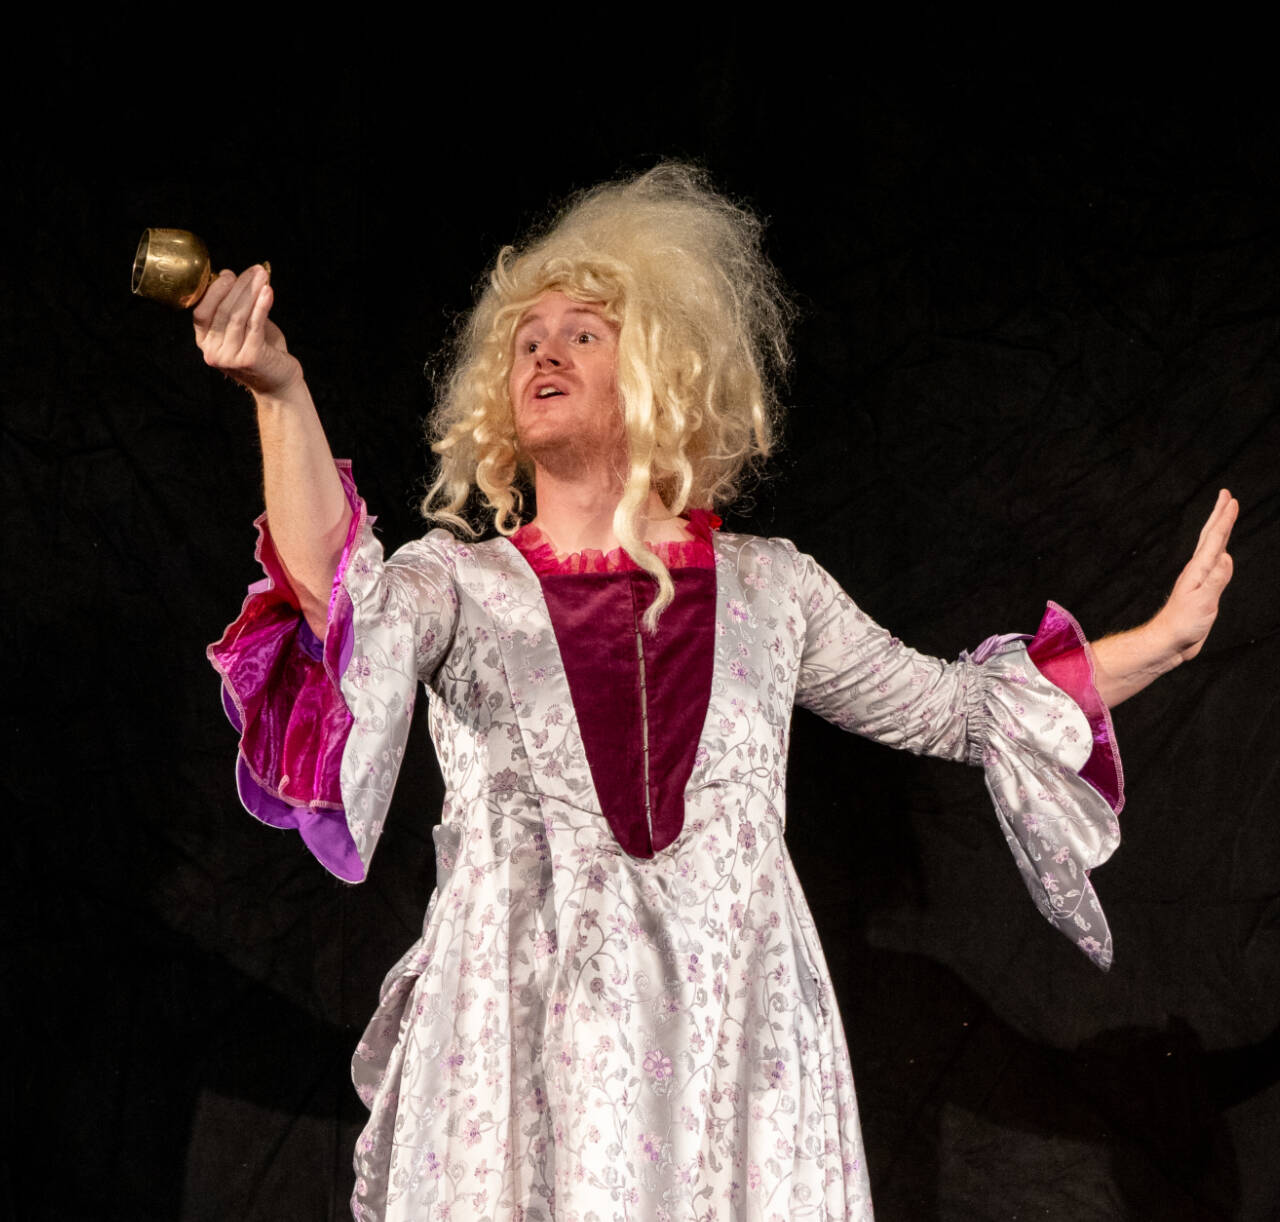 Morgan Bartholick portrays The Dame in the PA Panto production of “Goldilocks and the Ultimate Rampage,” that opens Friday. (Submitted photo)